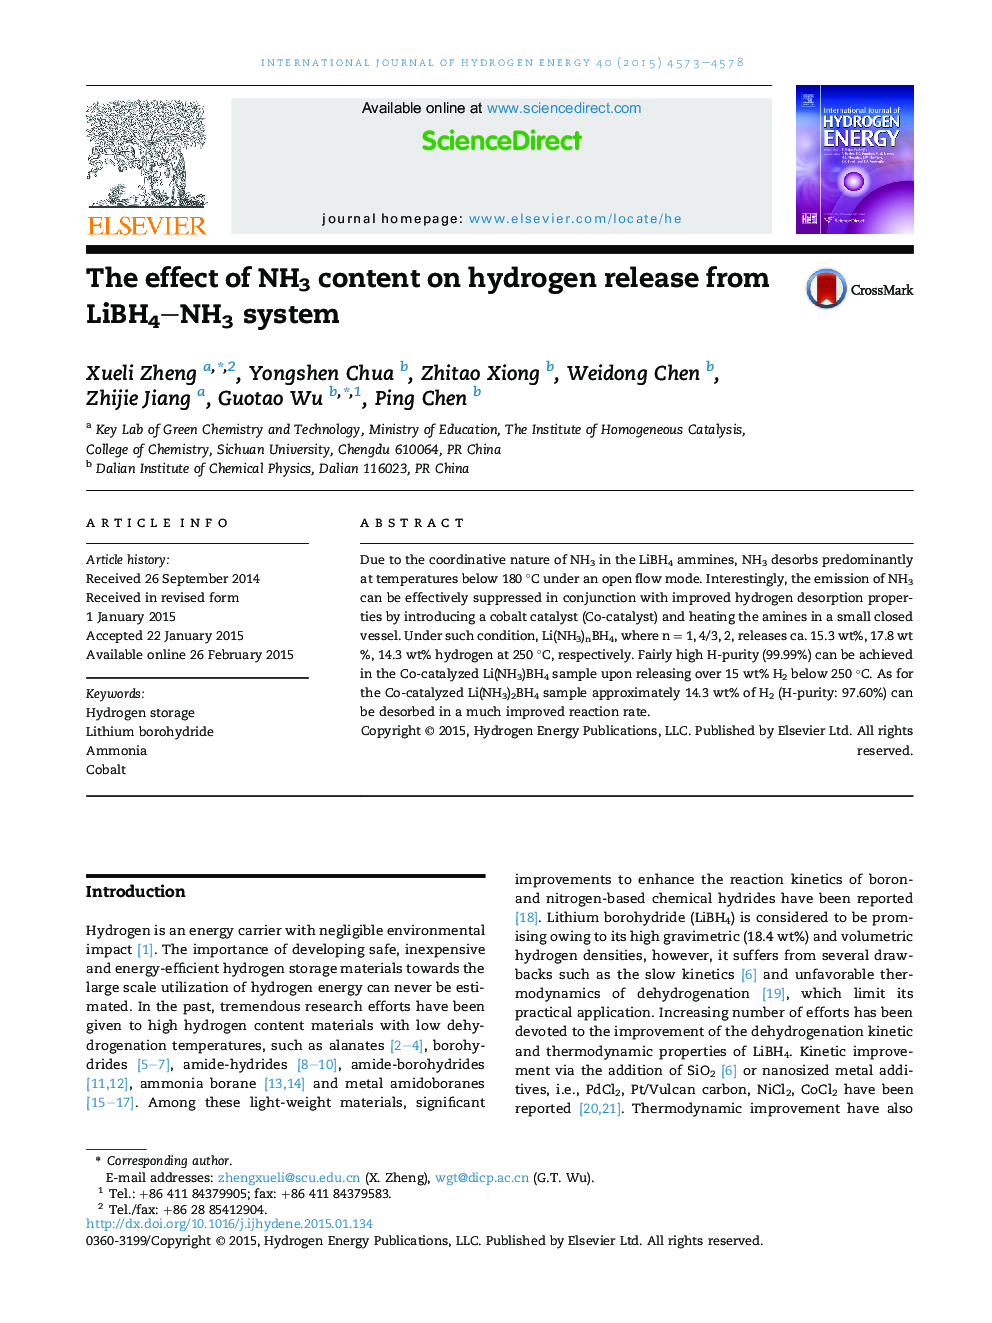 The effect of NH3 content on hydrogen release from LiBH4-NH3 system